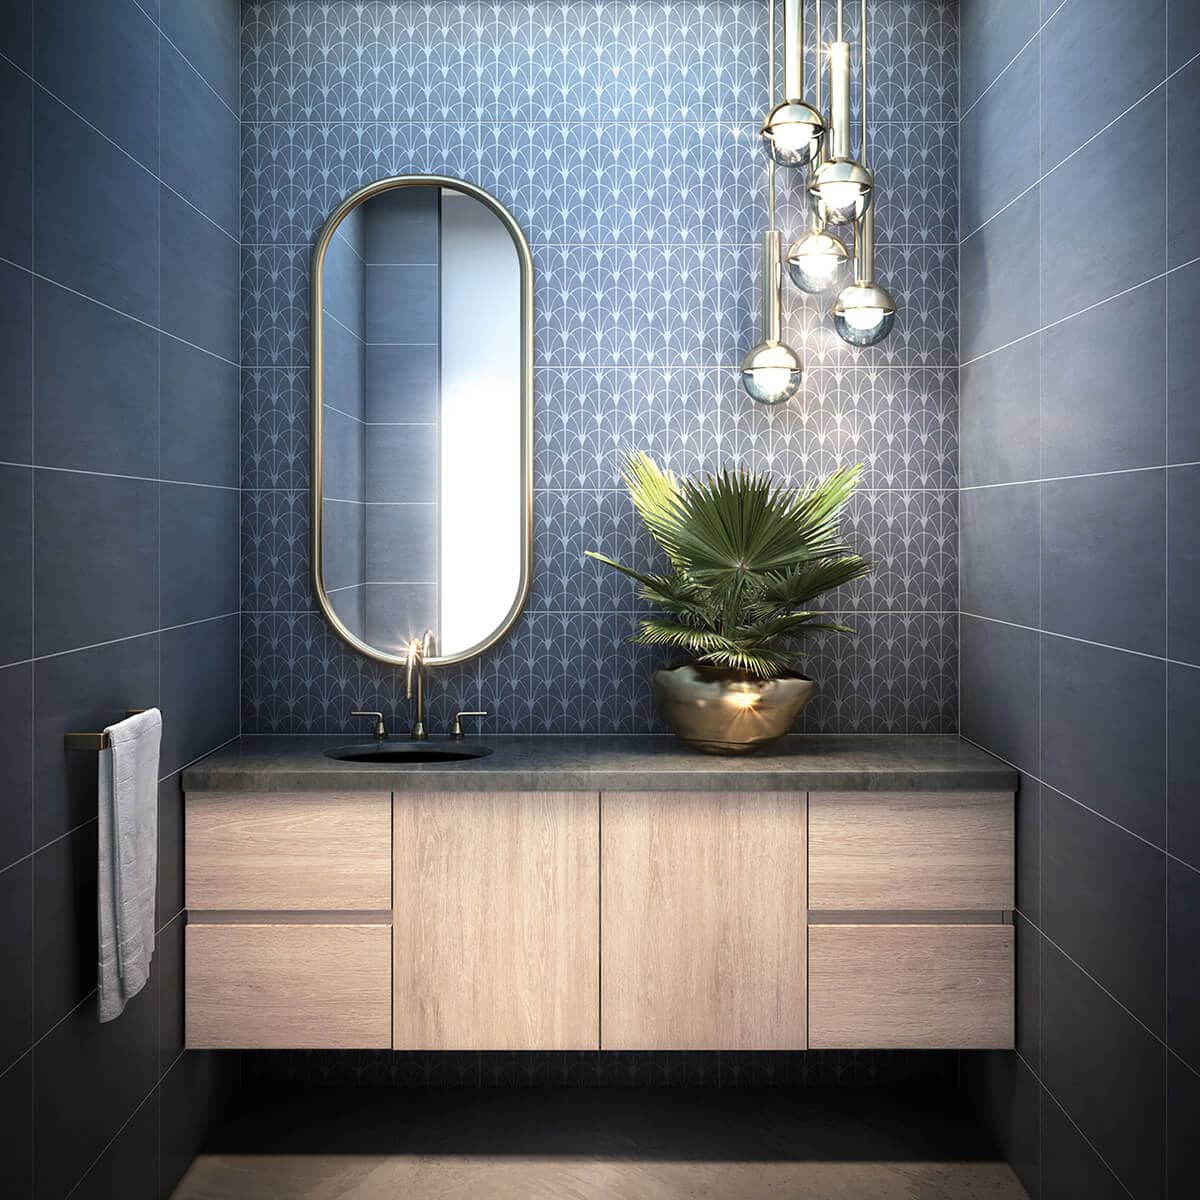 Blue powder room tile wall with an art deco pattern